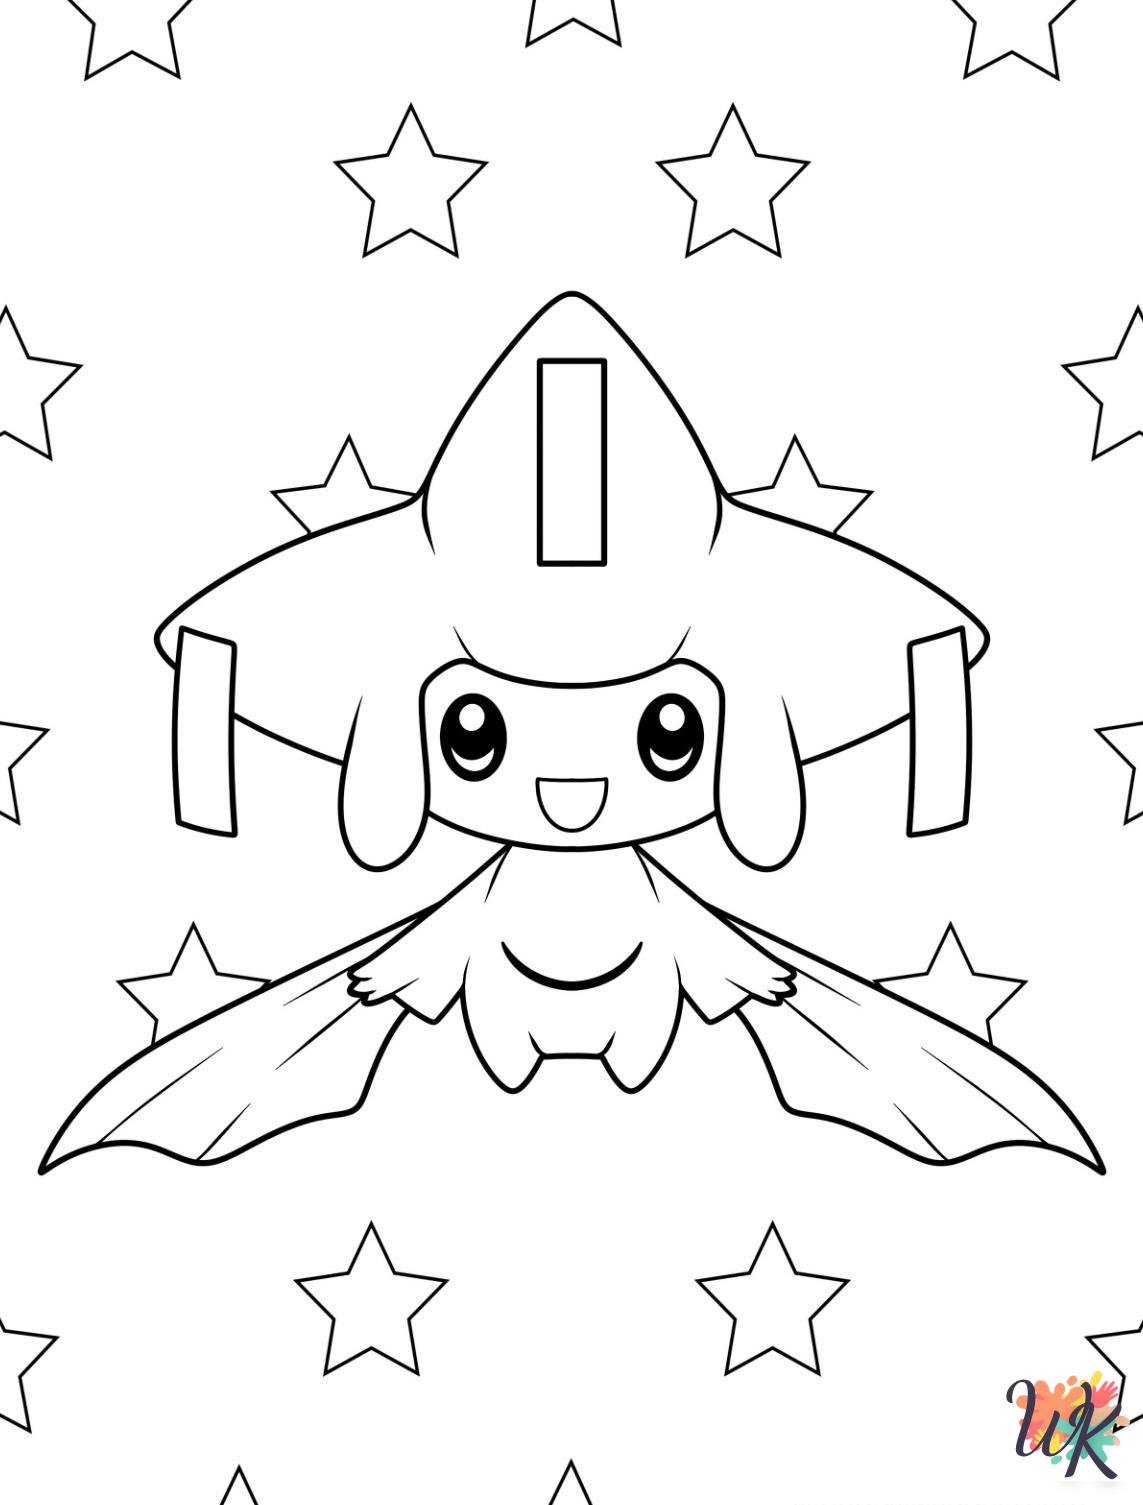 hard Legendary Pokemon coloring pages